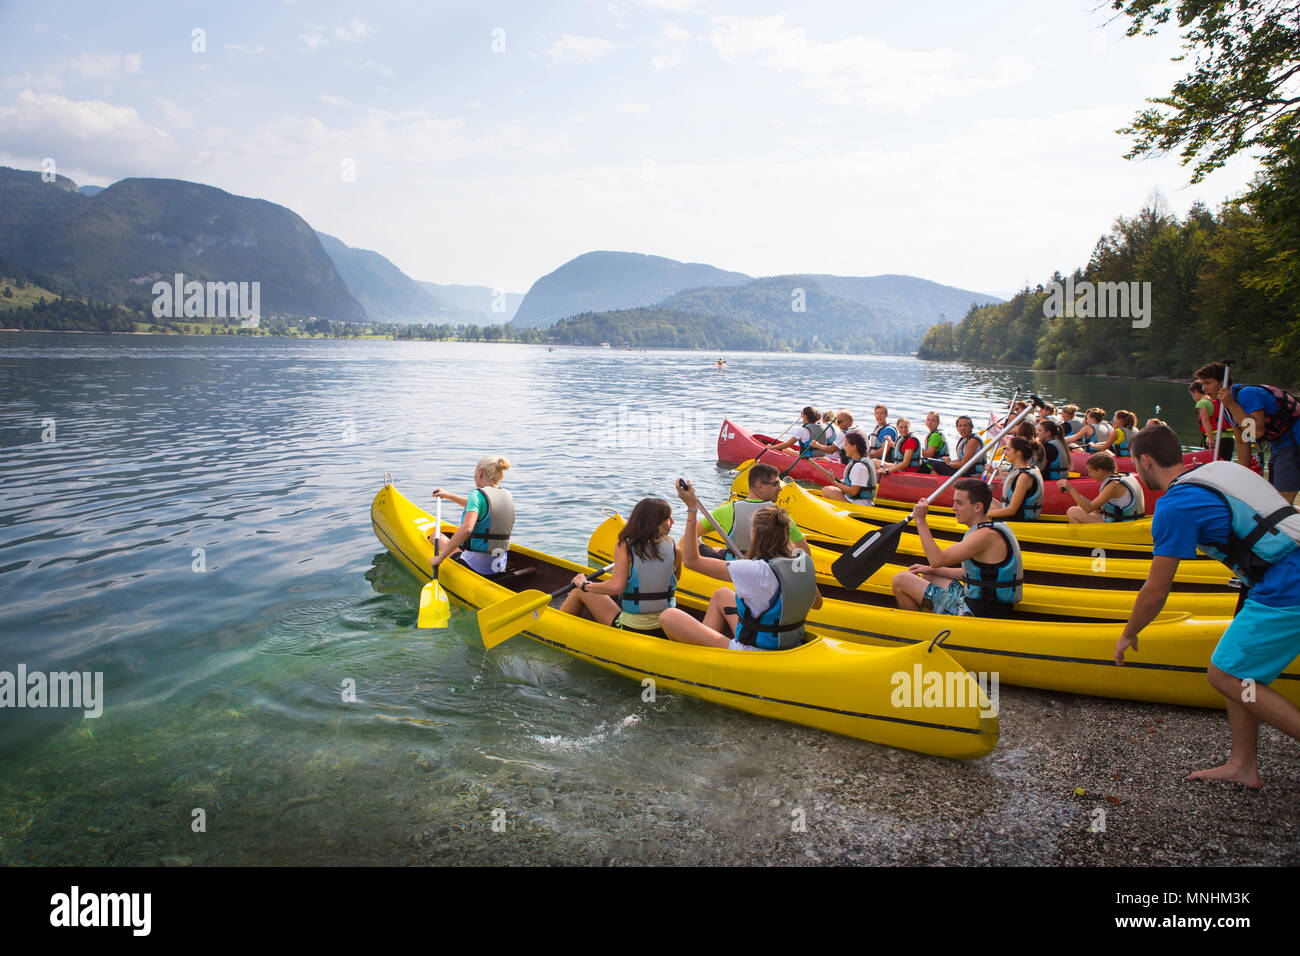 Young adults of school class are entering water of lake Bohinj with canoes, largest permanent lake located in Bohinj Valley of Julian Alps, Triglav National Park, Slovenia Stock Photo